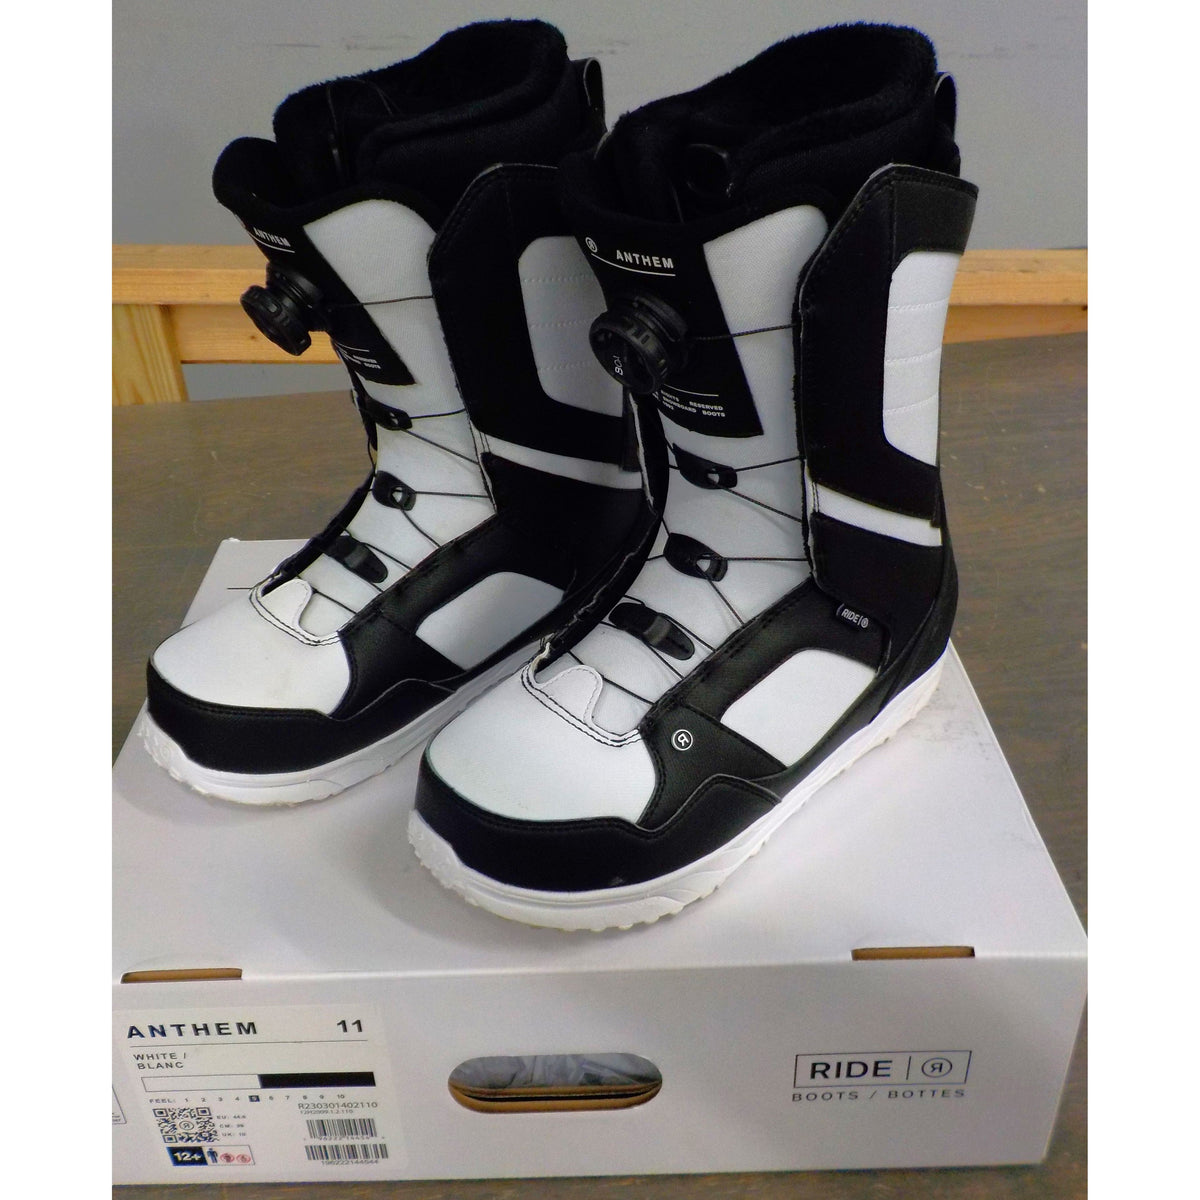 Ride Anthem Snowboard Boots - White - 11 - Used - Acceptable